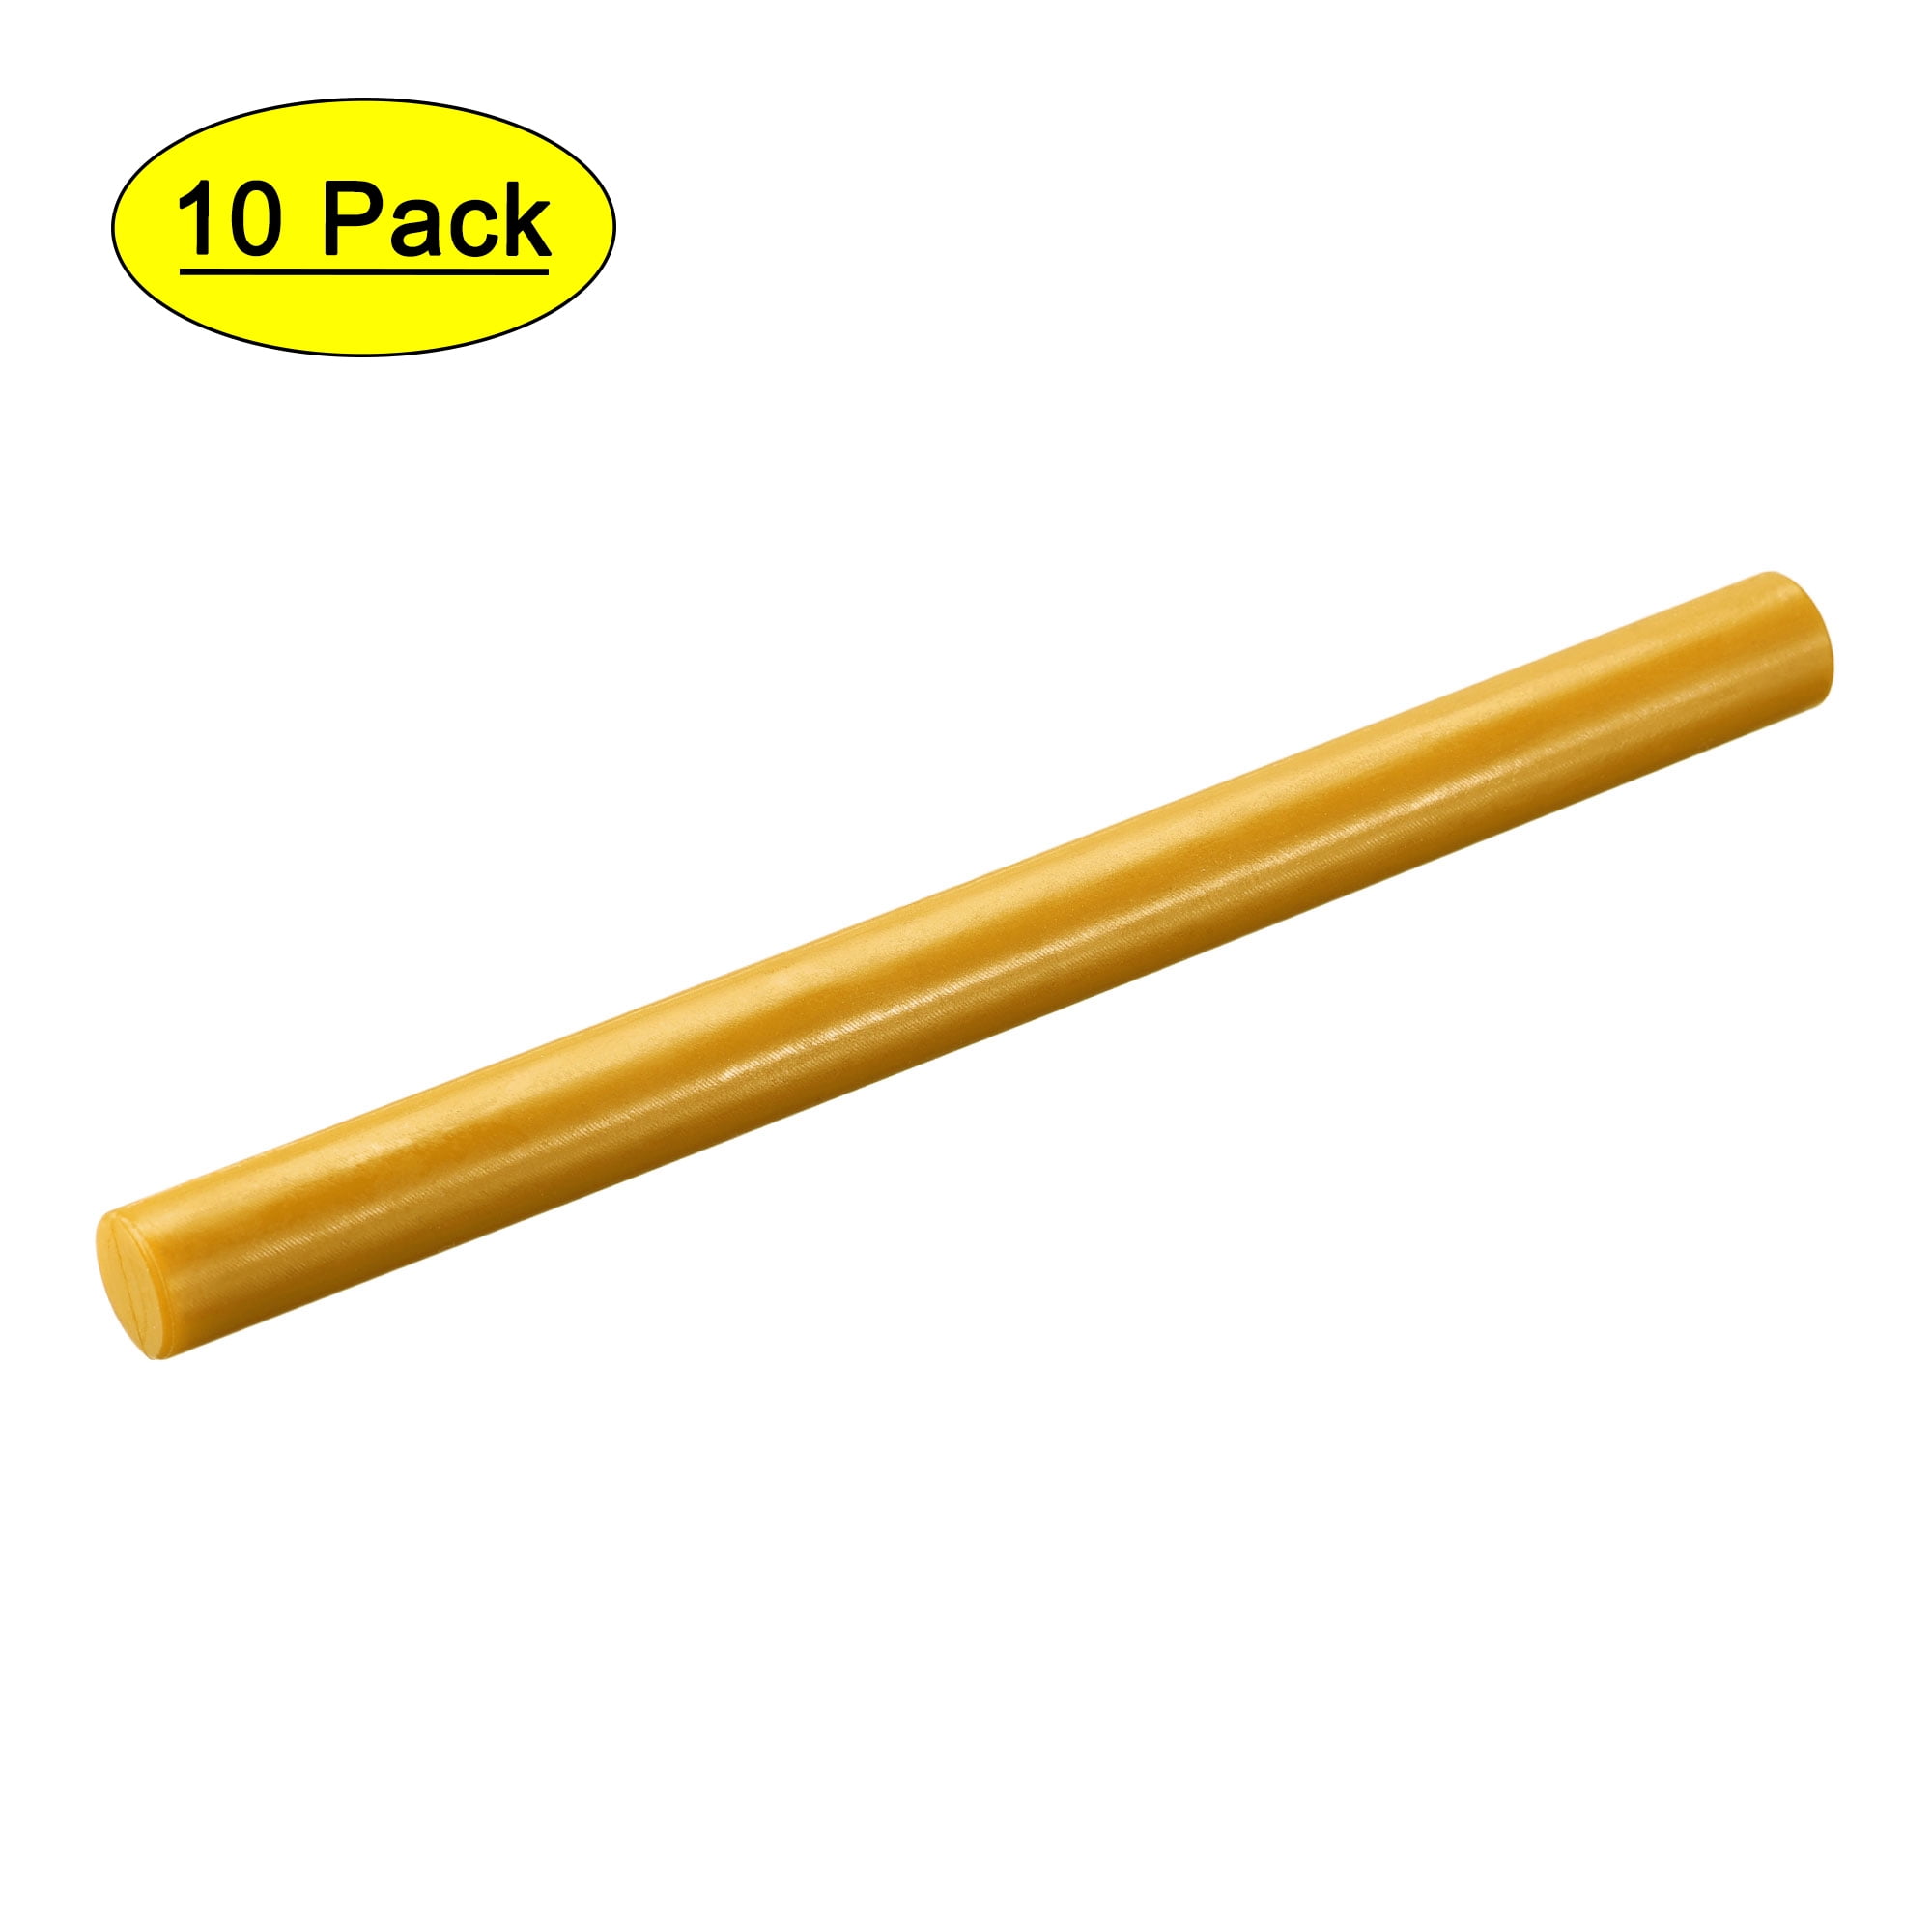 Uxcell Seal Wax Sticks Round 5.38 inch Length for Wax Seal Stamp Cards Royal Gold 10 Pack, Size: 5.38 x 0.43 inch / 13.8 x 1.1 cm (Length x Dia.)